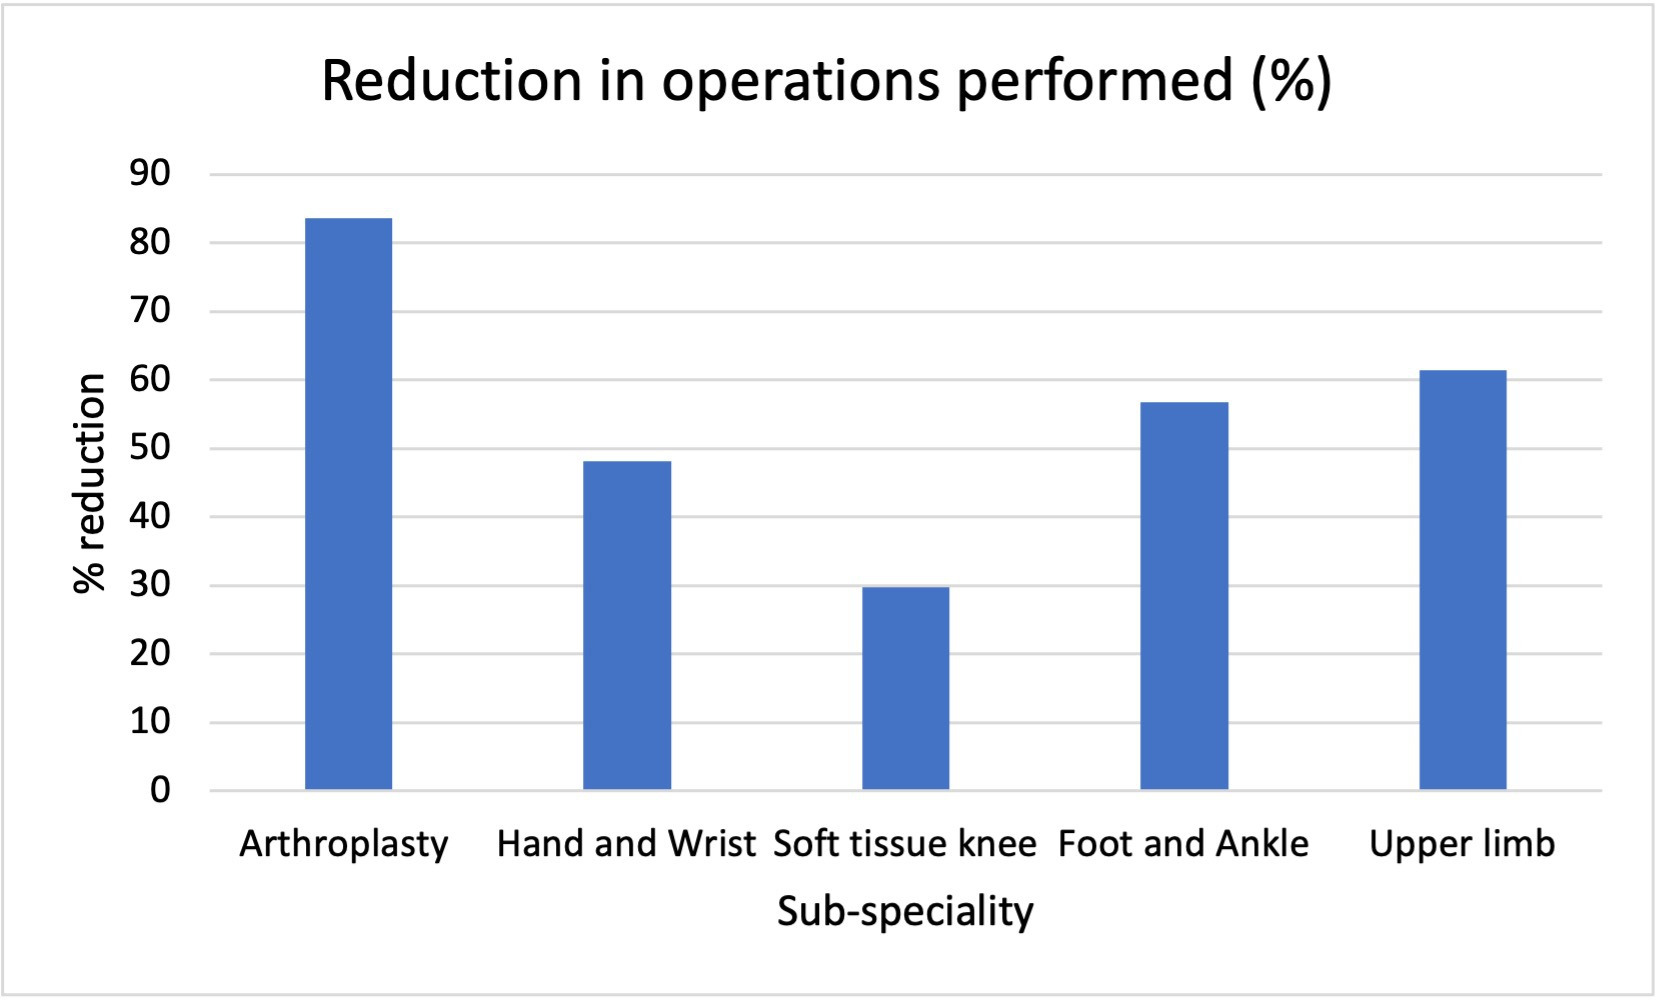 Fig. 1 
            The reduction of operations performed for each sub-specialty between 2019 and 2020.
          